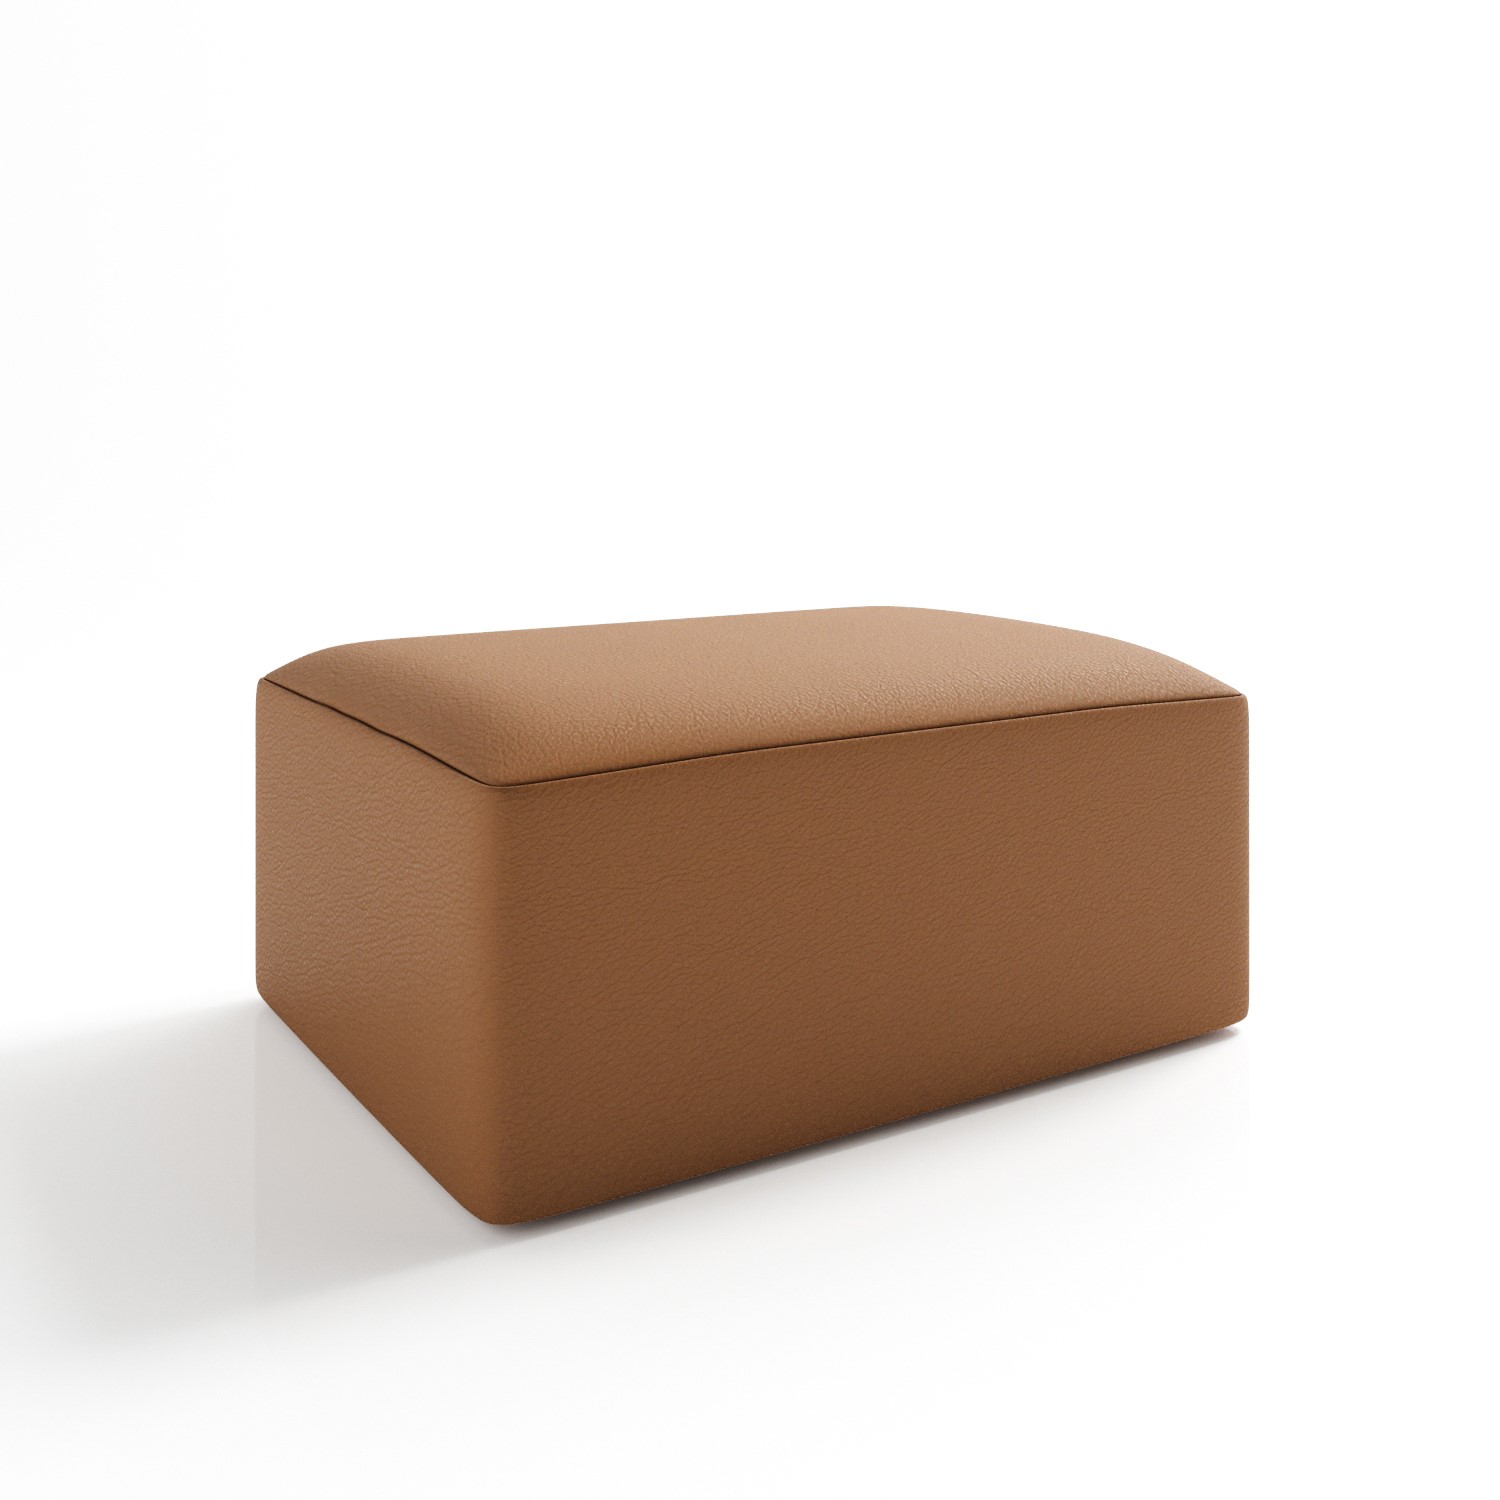 Photo of Tan faux leather footstool - hendrix